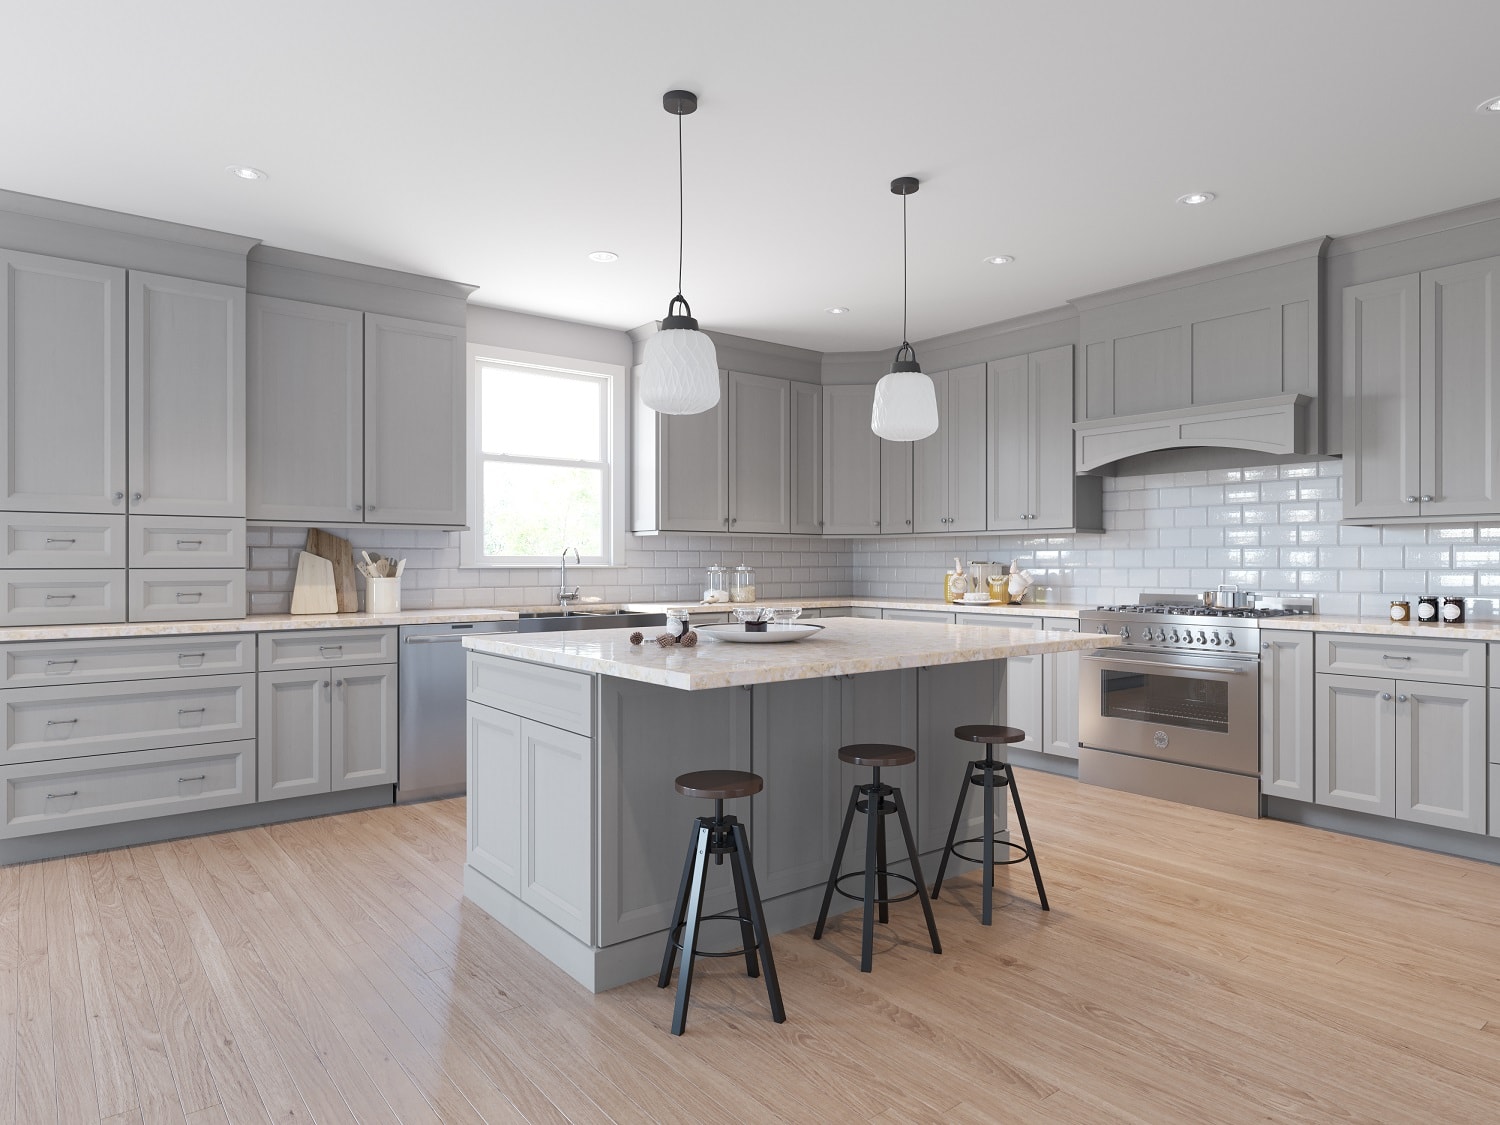 Light Grey Cabinets - Home Cabinets Design